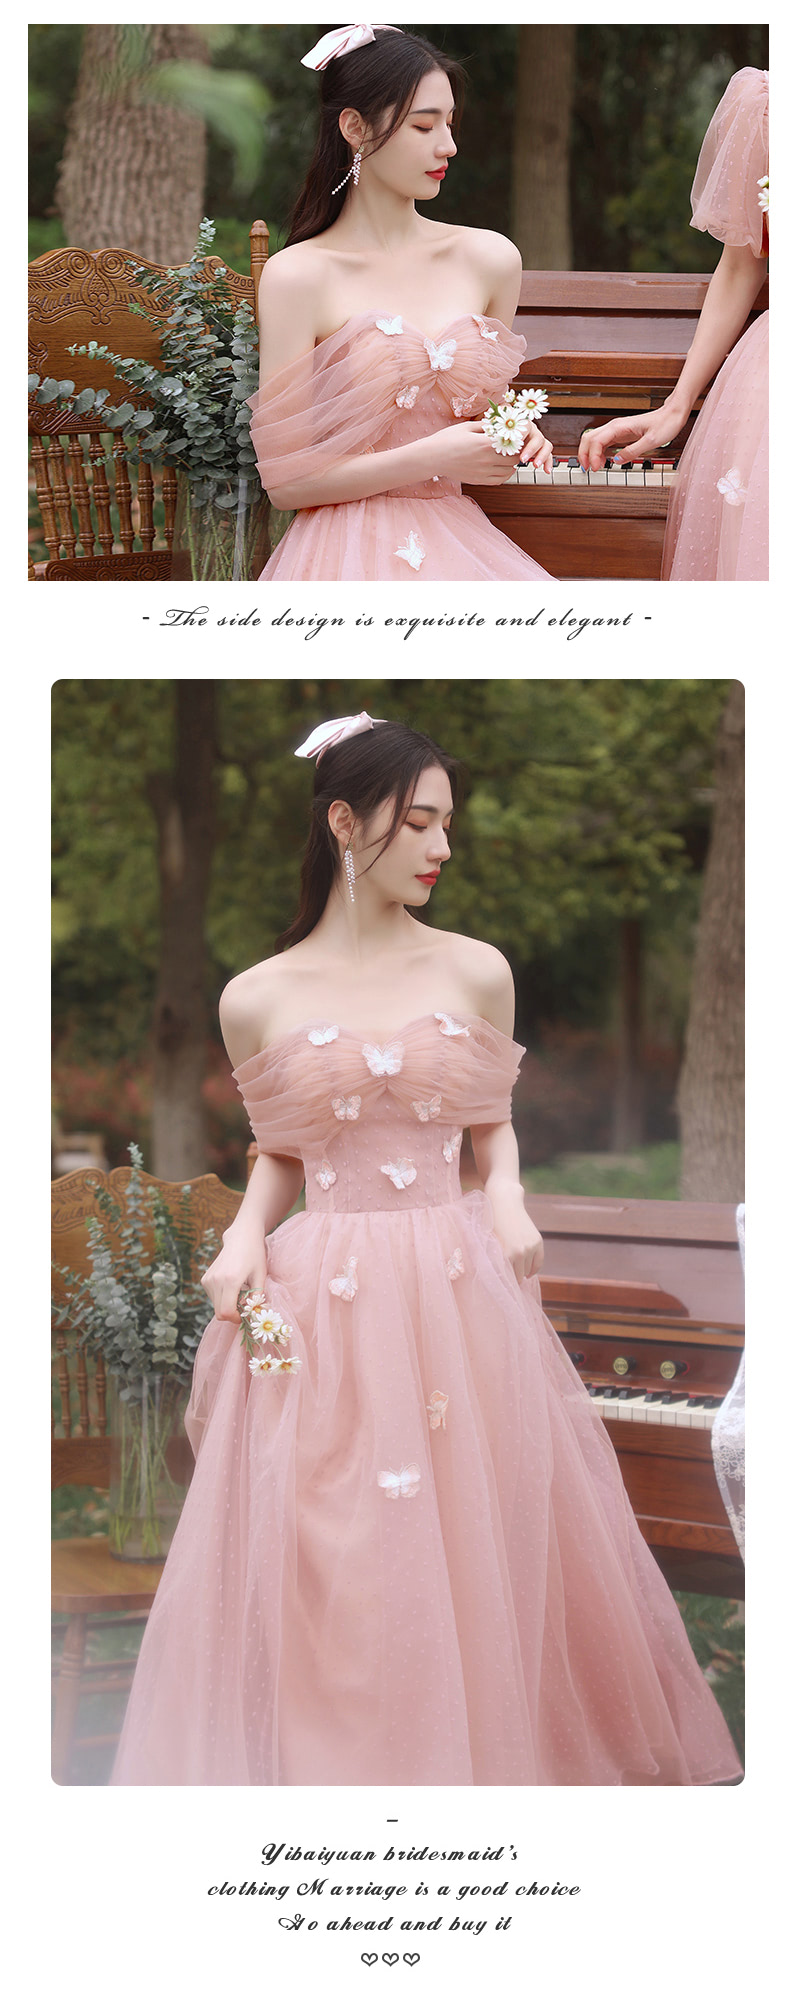 A-Line-Pink-Tulle-Bridesmaid-Formal-Wedding-Guest-Party-Dress20.jpg